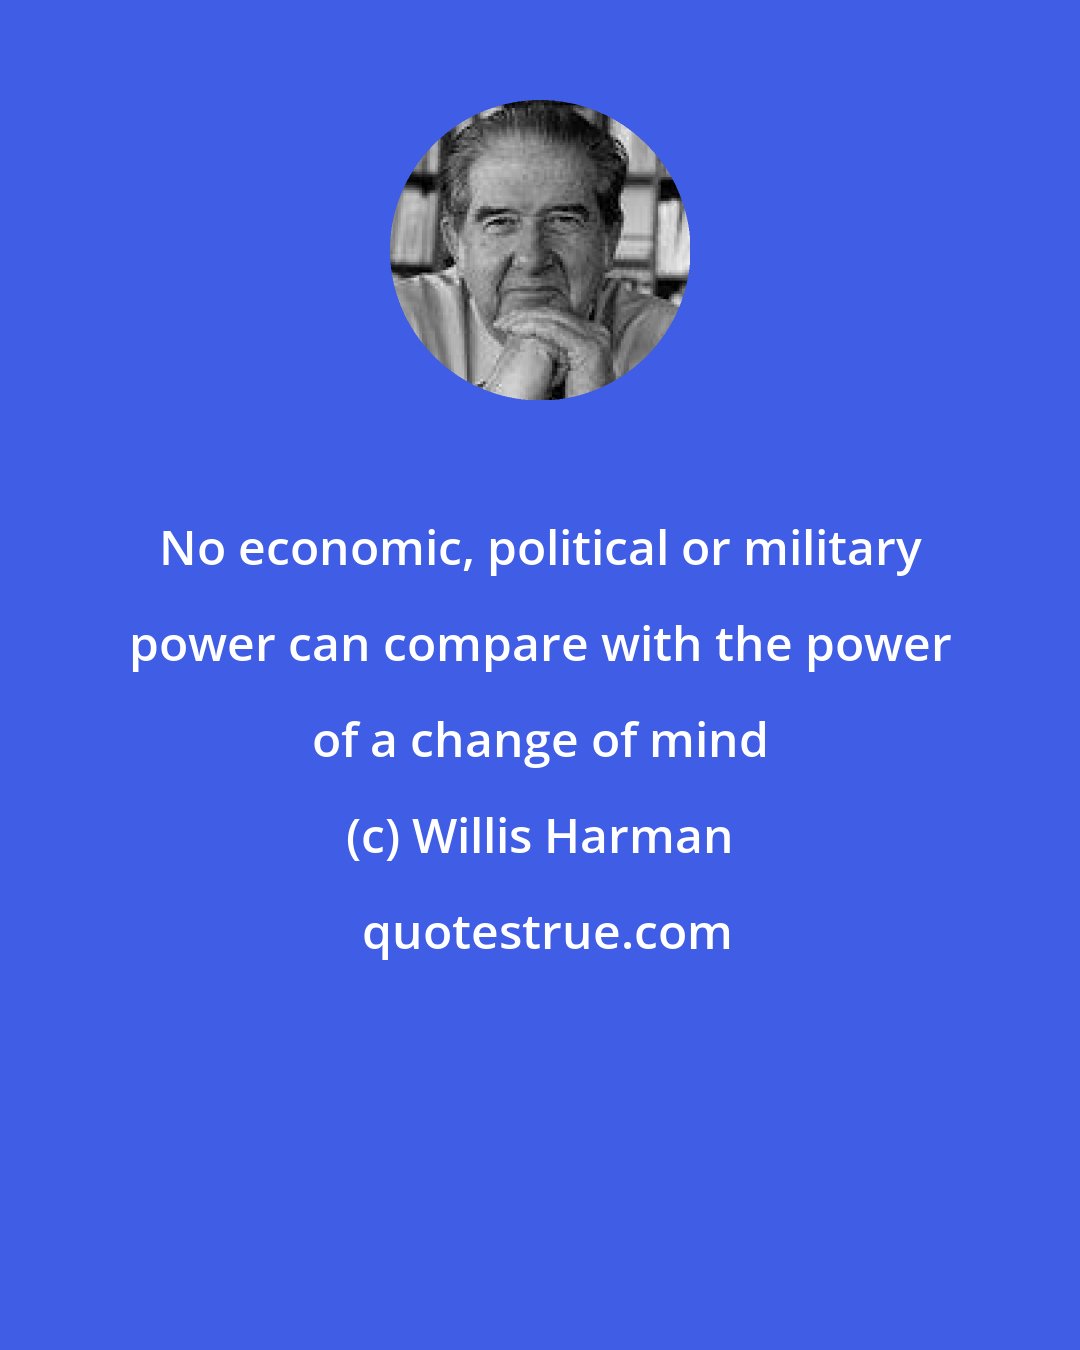 Willis Harman: No economic, political or military power can compare with the power of a change of mind